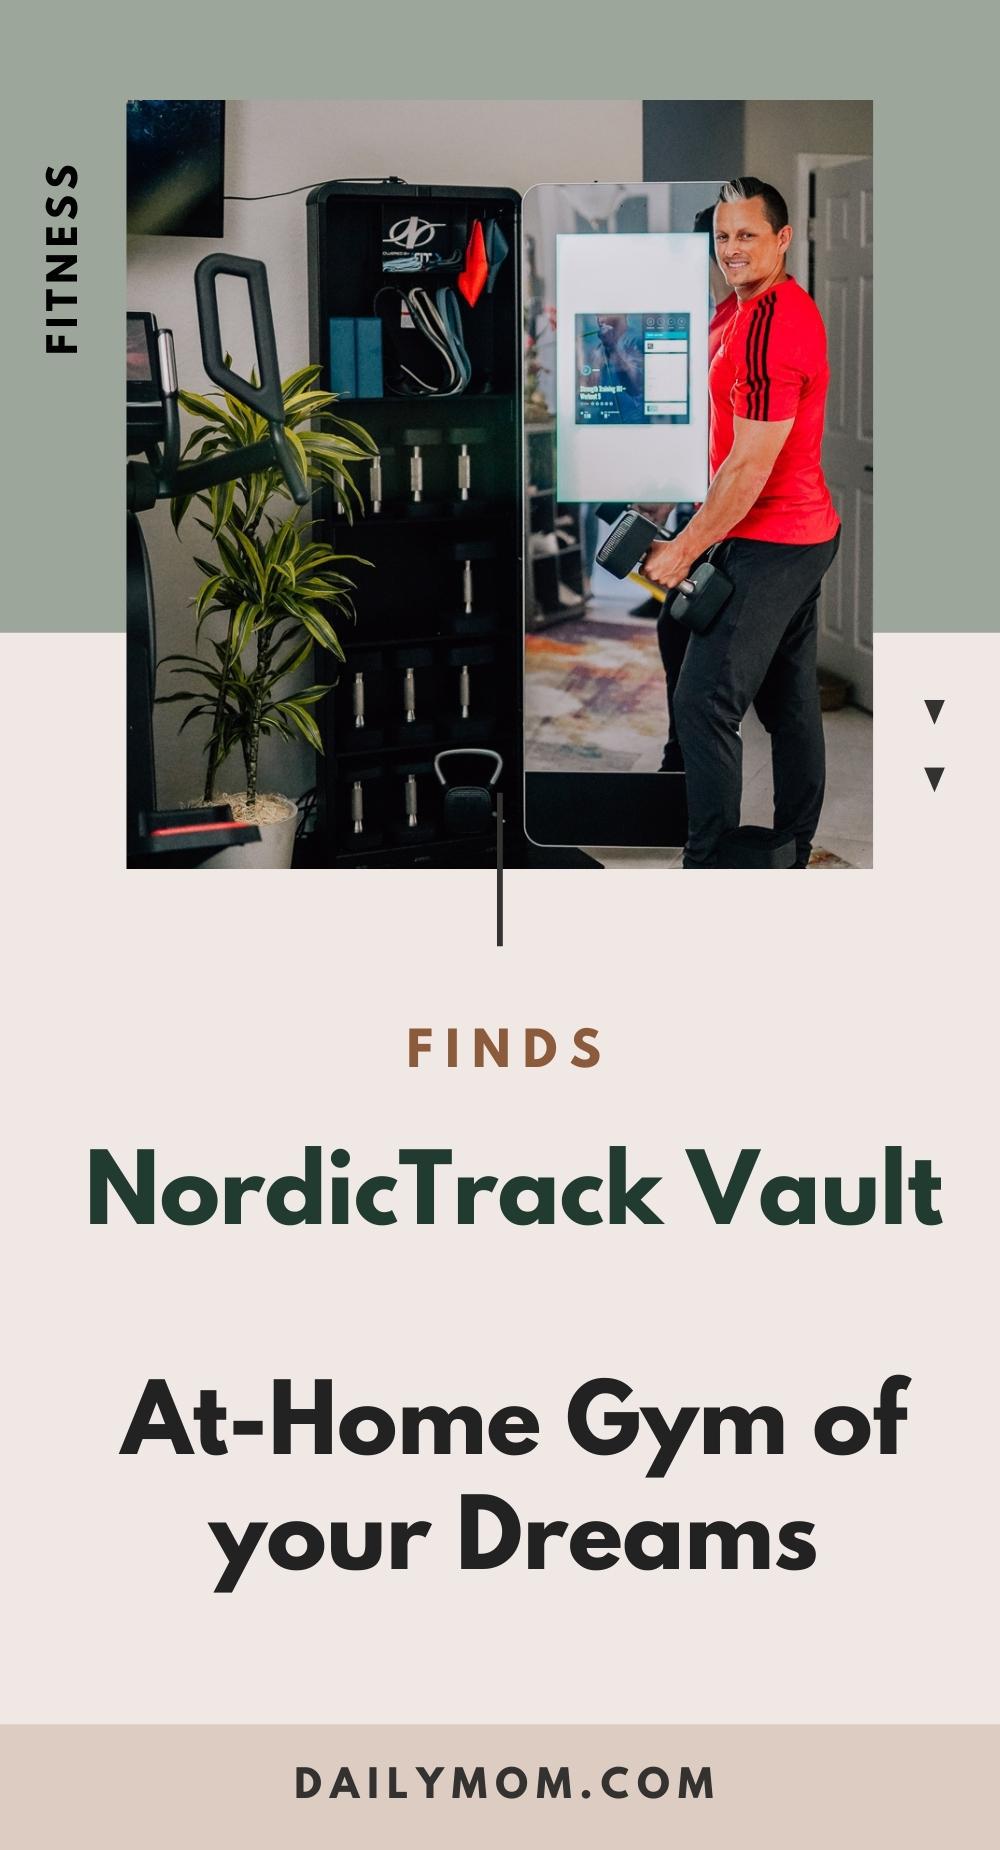 Nordictrack Vault – At Home Gym Machine Of Your Dreams